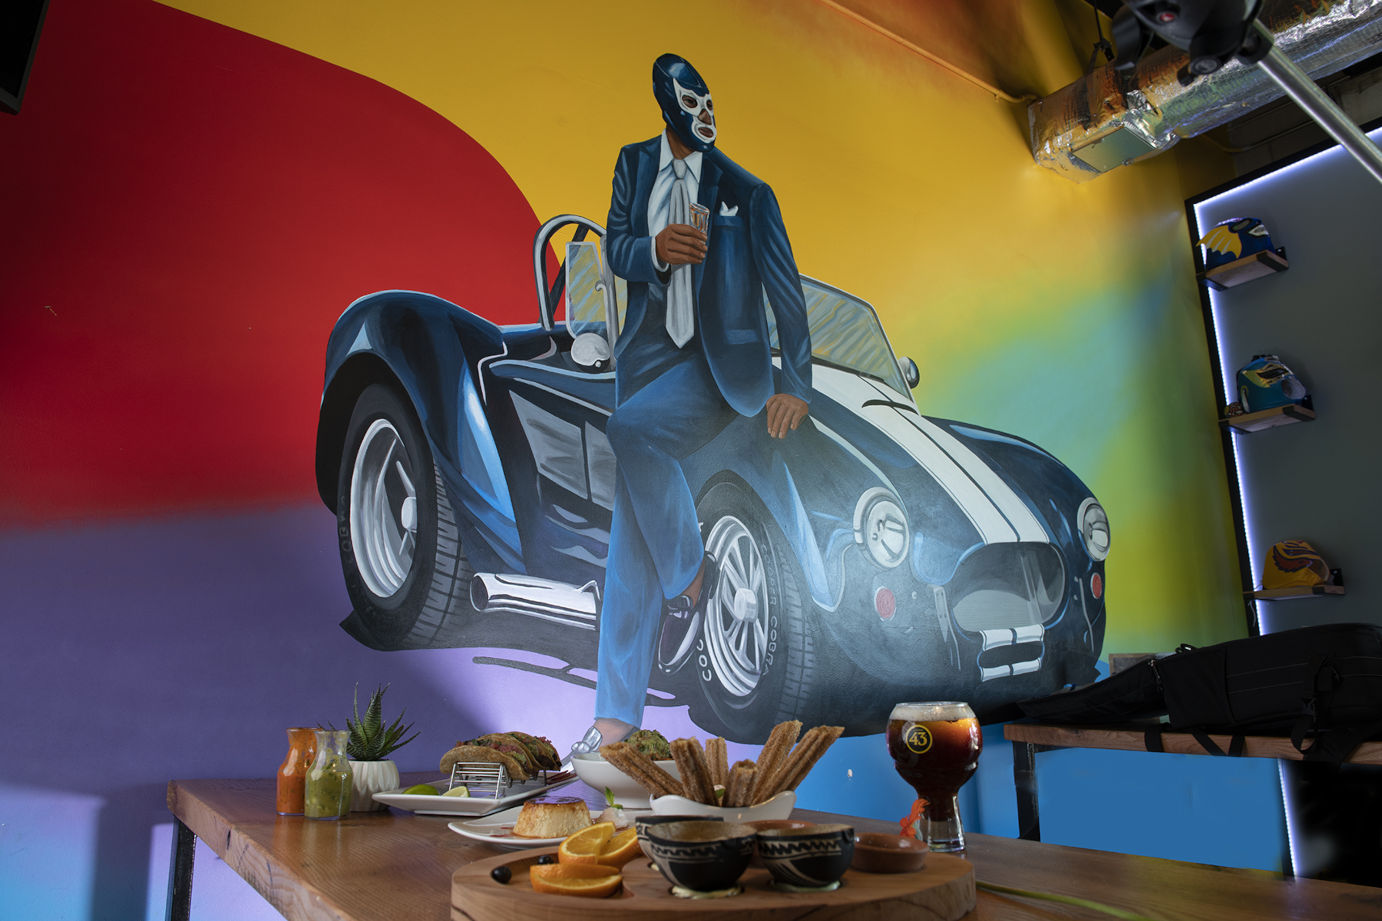 Interior, served food and drink on a table by a wall with mural art